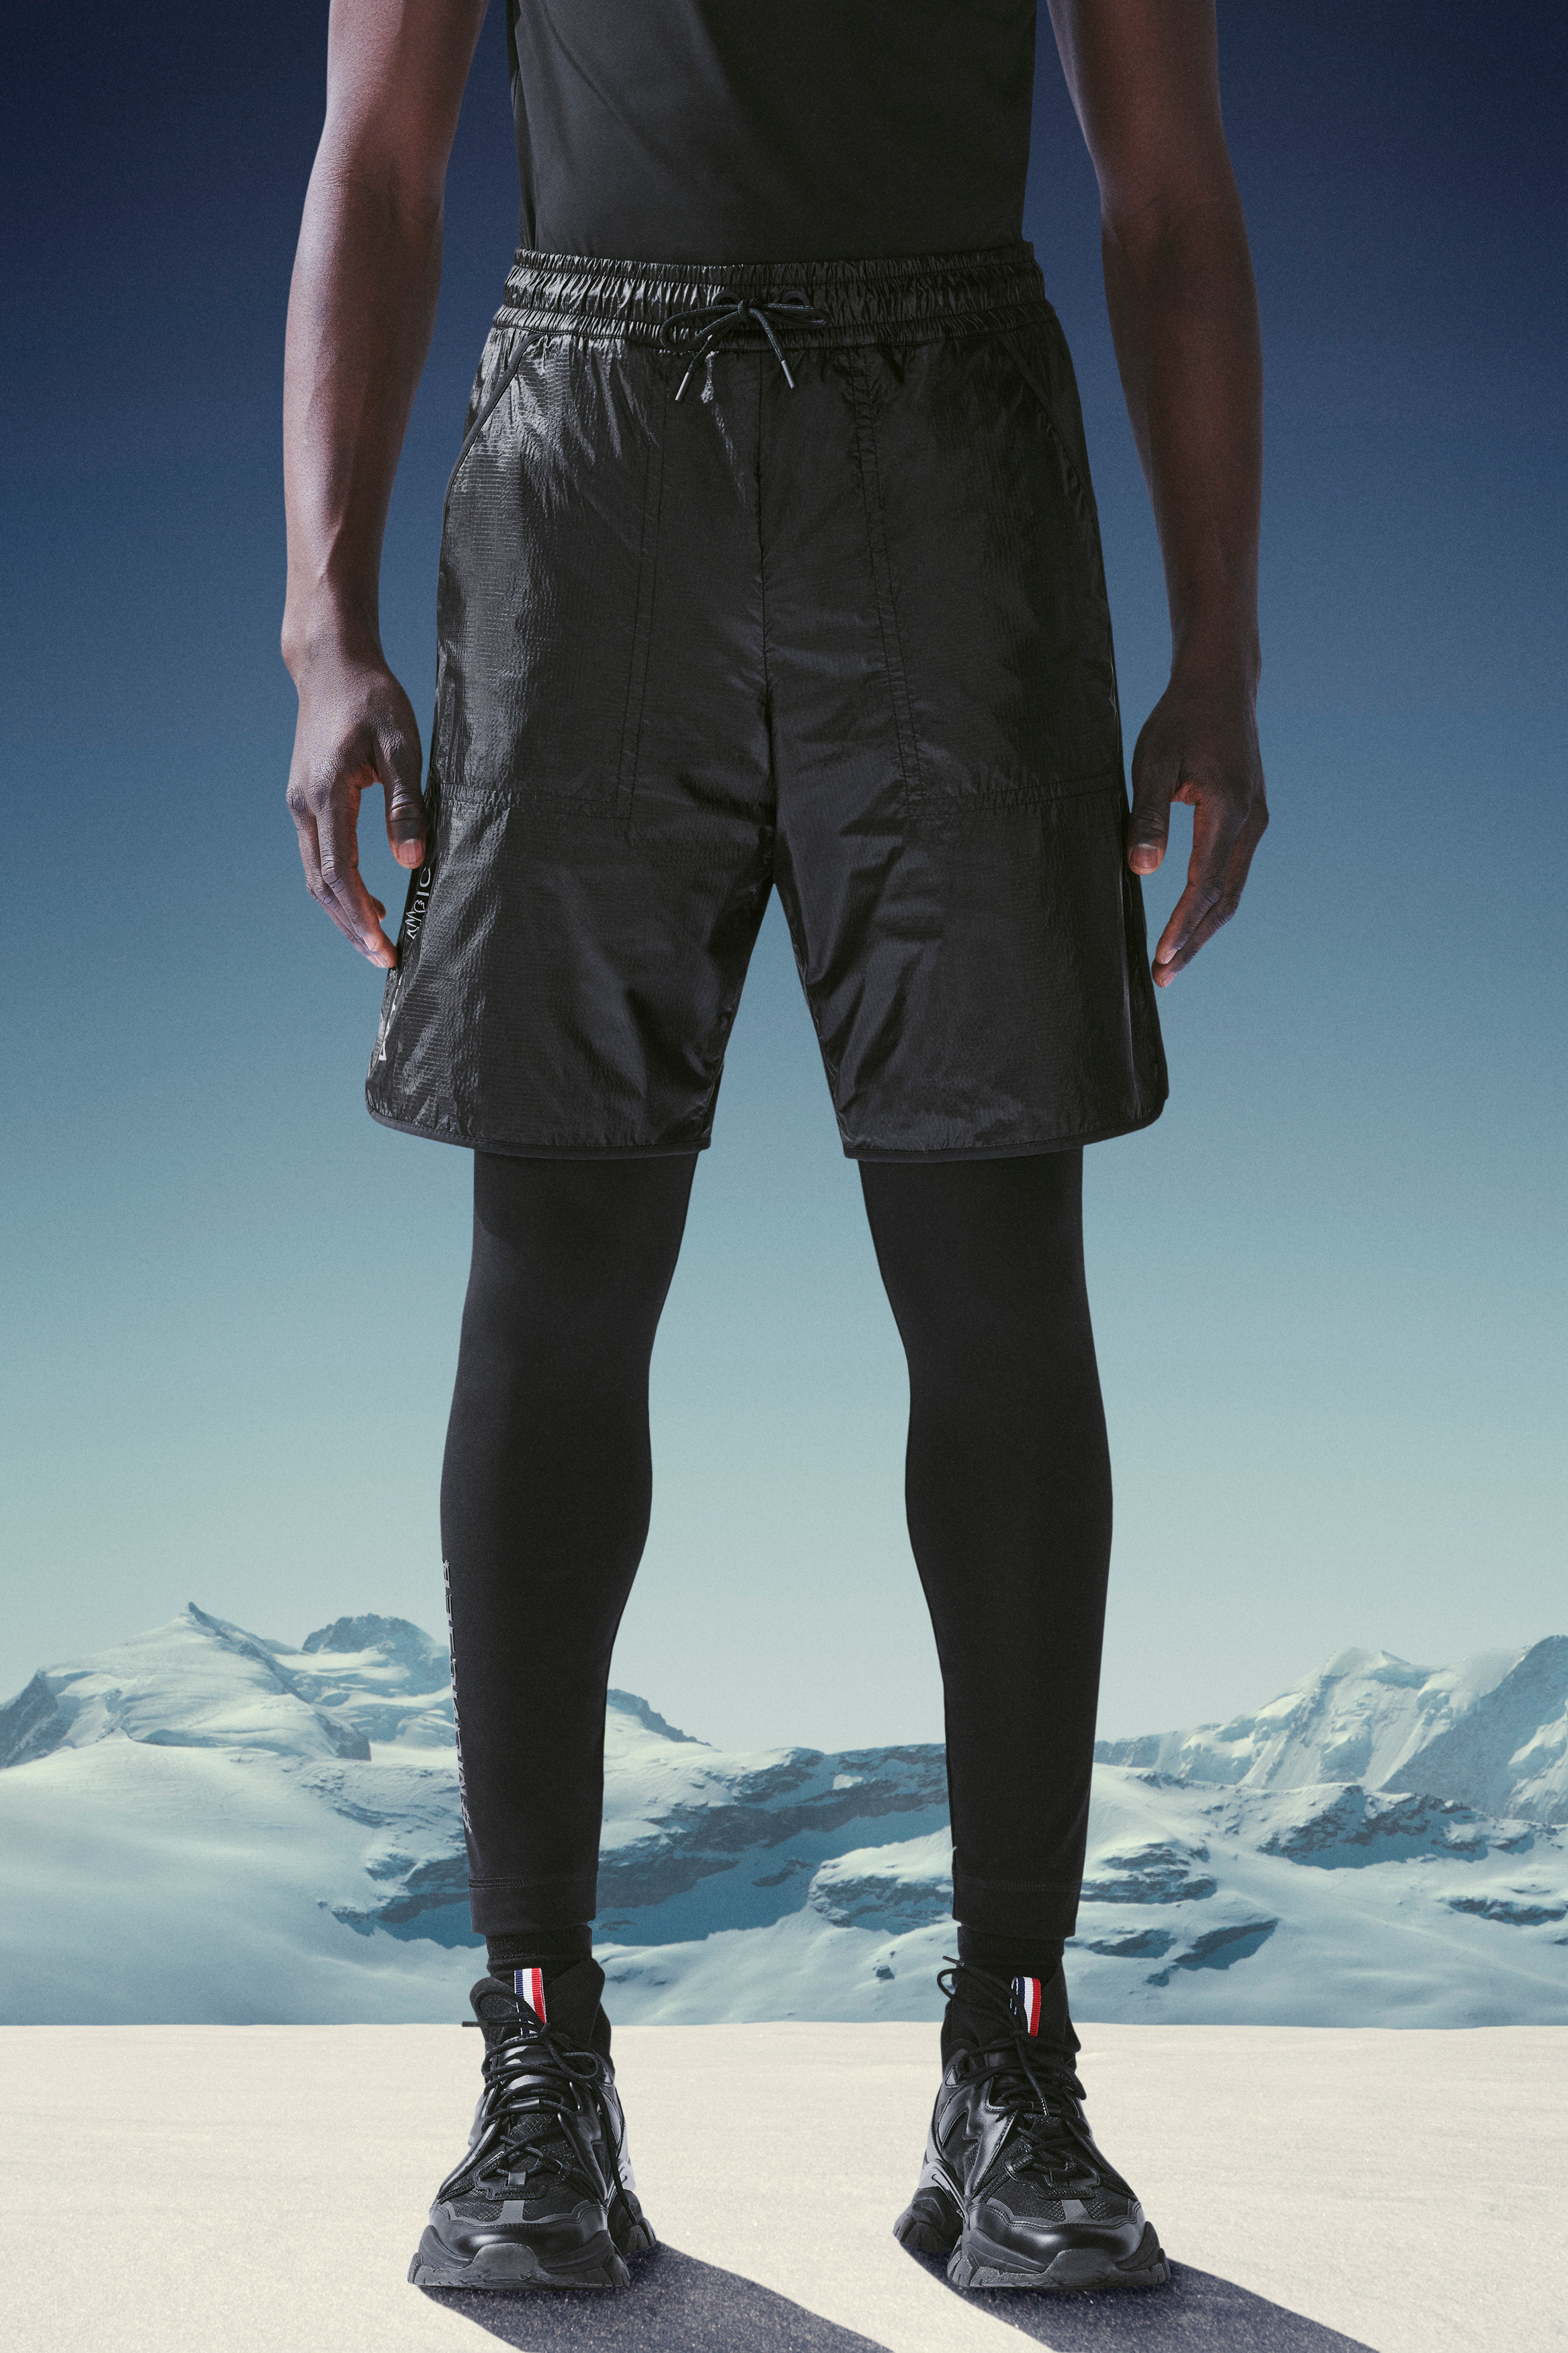 View All Designs for Men - Grenoble | Moncler US